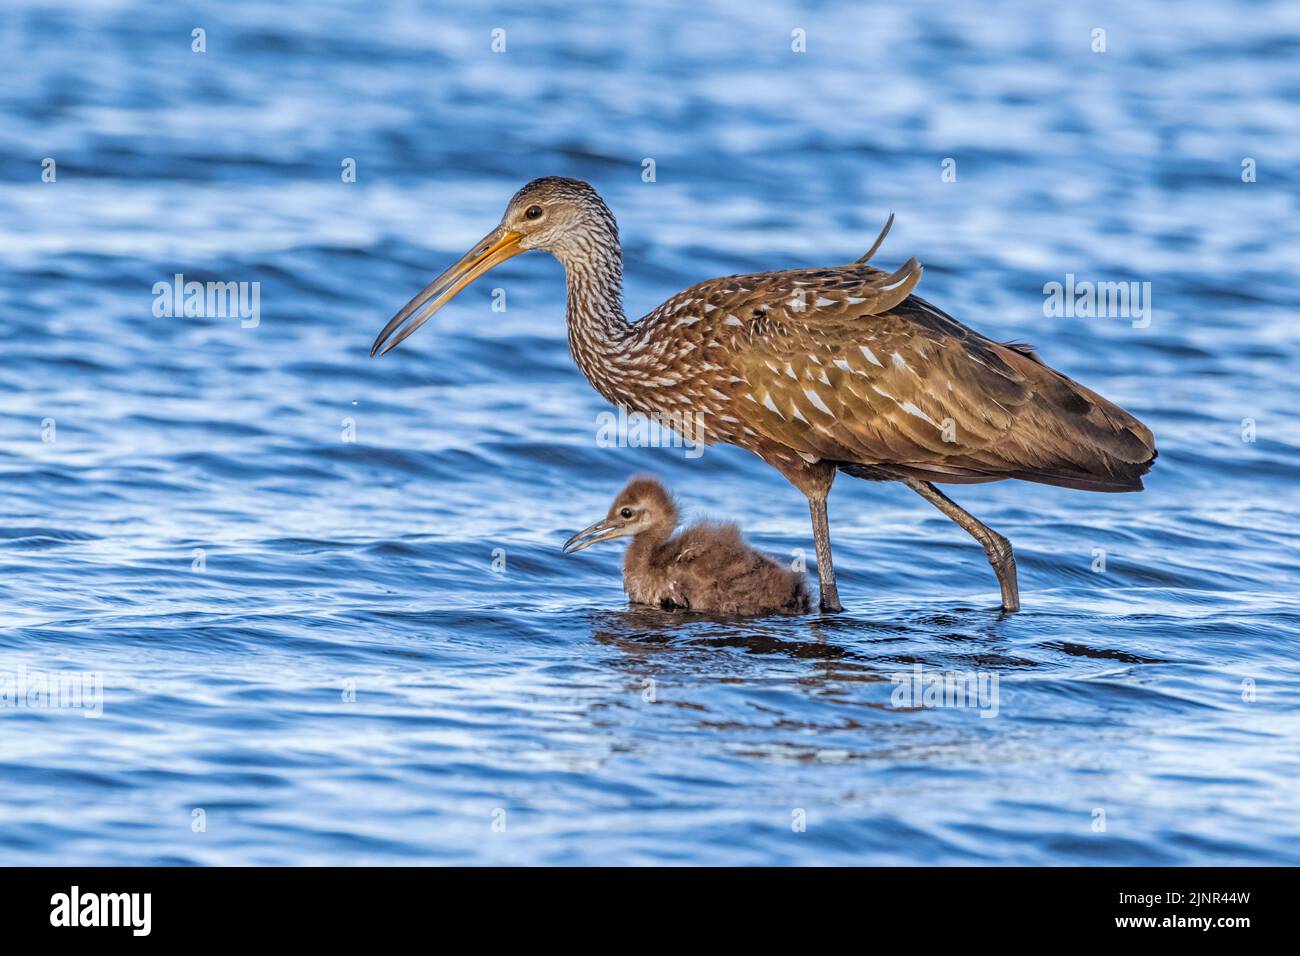 A mother Limpkin (Aramus guarauna) feeding and teaching its baby in Myakka River State Park, Florida. Limpkins are related to cranes and rails, and sp Stock Photo